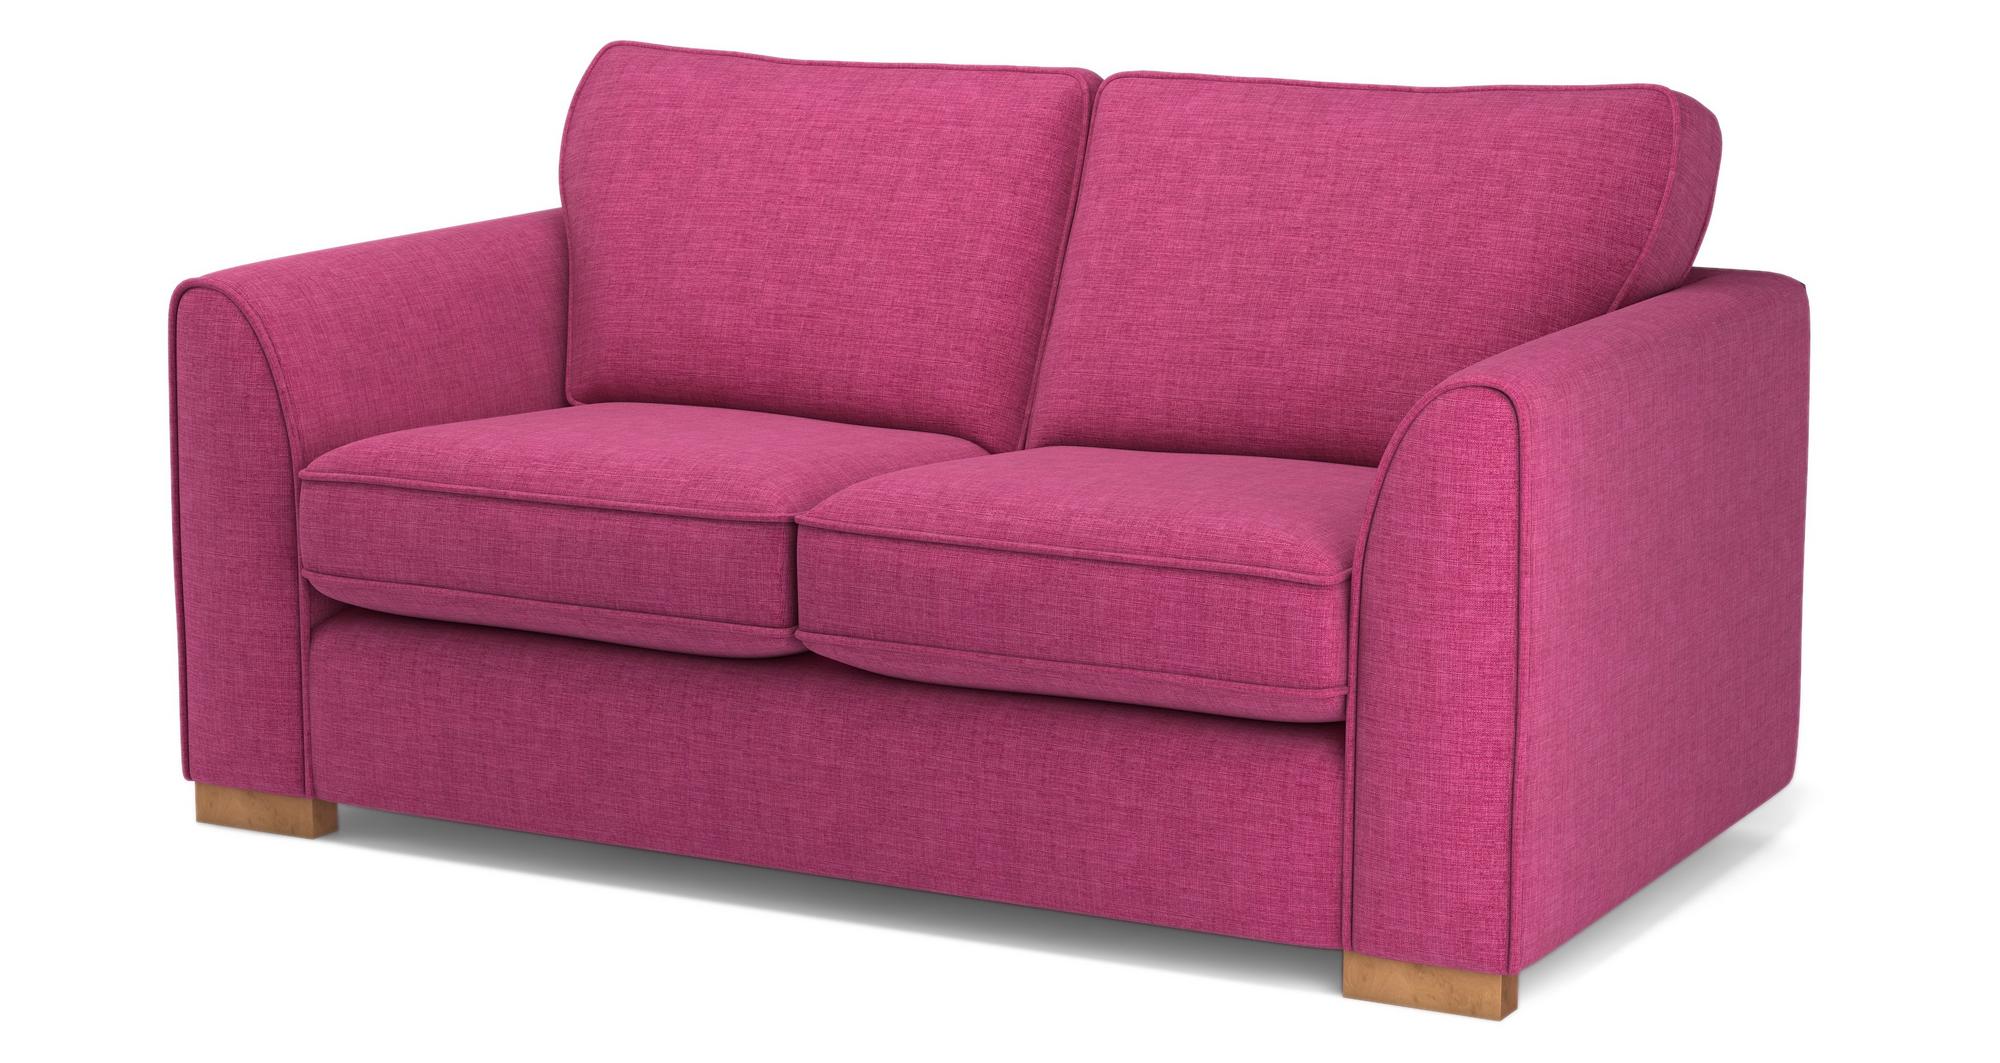 Dfs Revive Orchid Pink Fabric 2 Seater Sofa Ebay